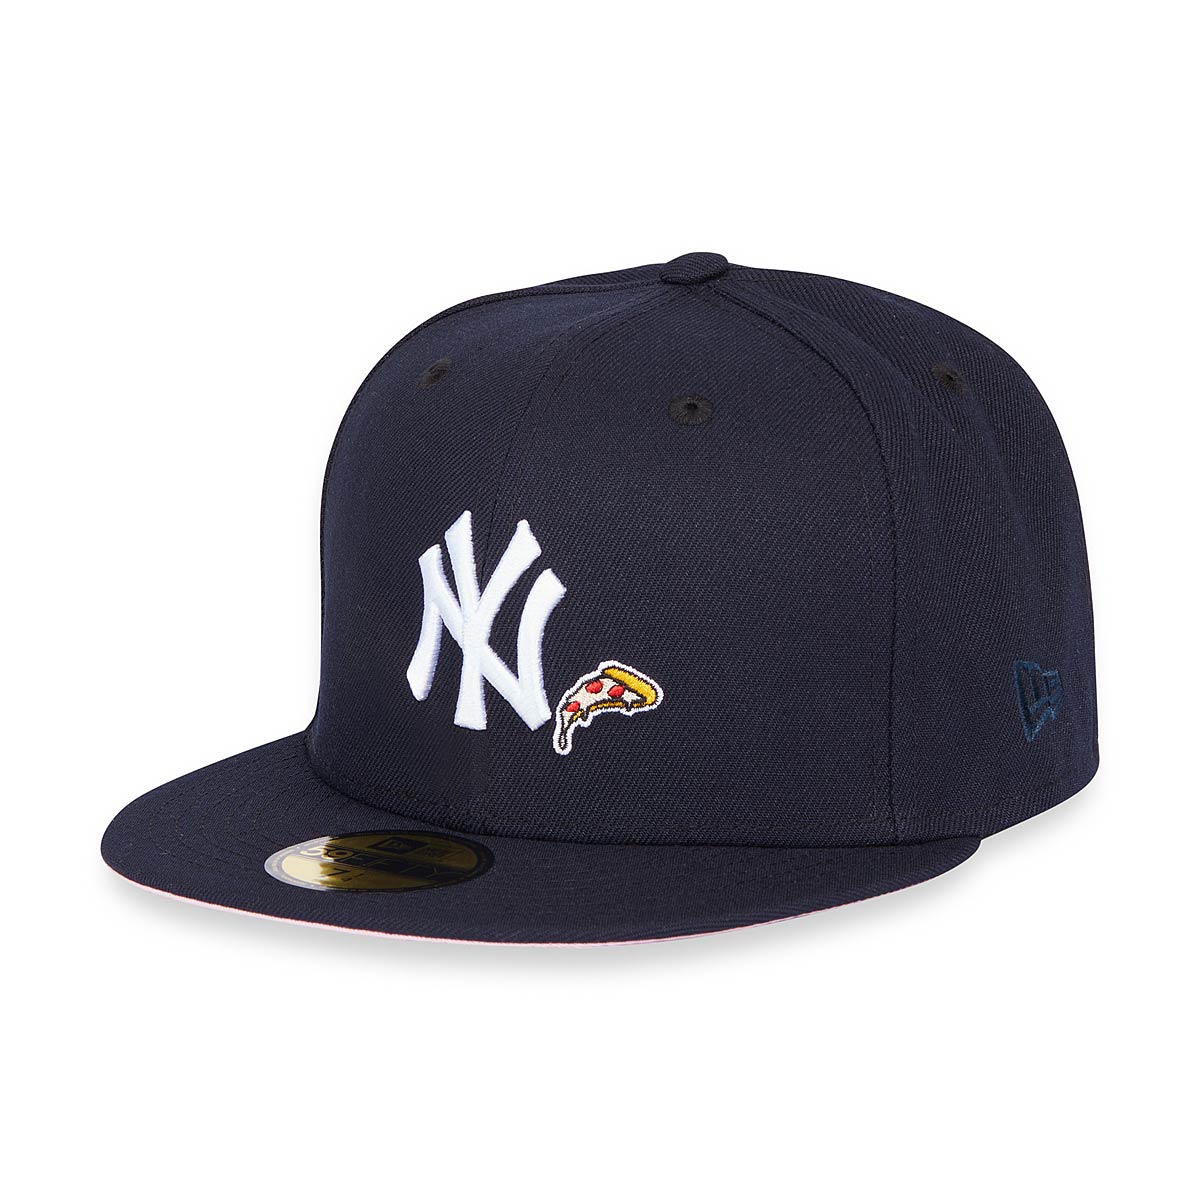 Buy MLB NEW YORK YANKEES PIZZA 27x WORLD CHAMPIONS PATCH 59FIFTY CAP ...